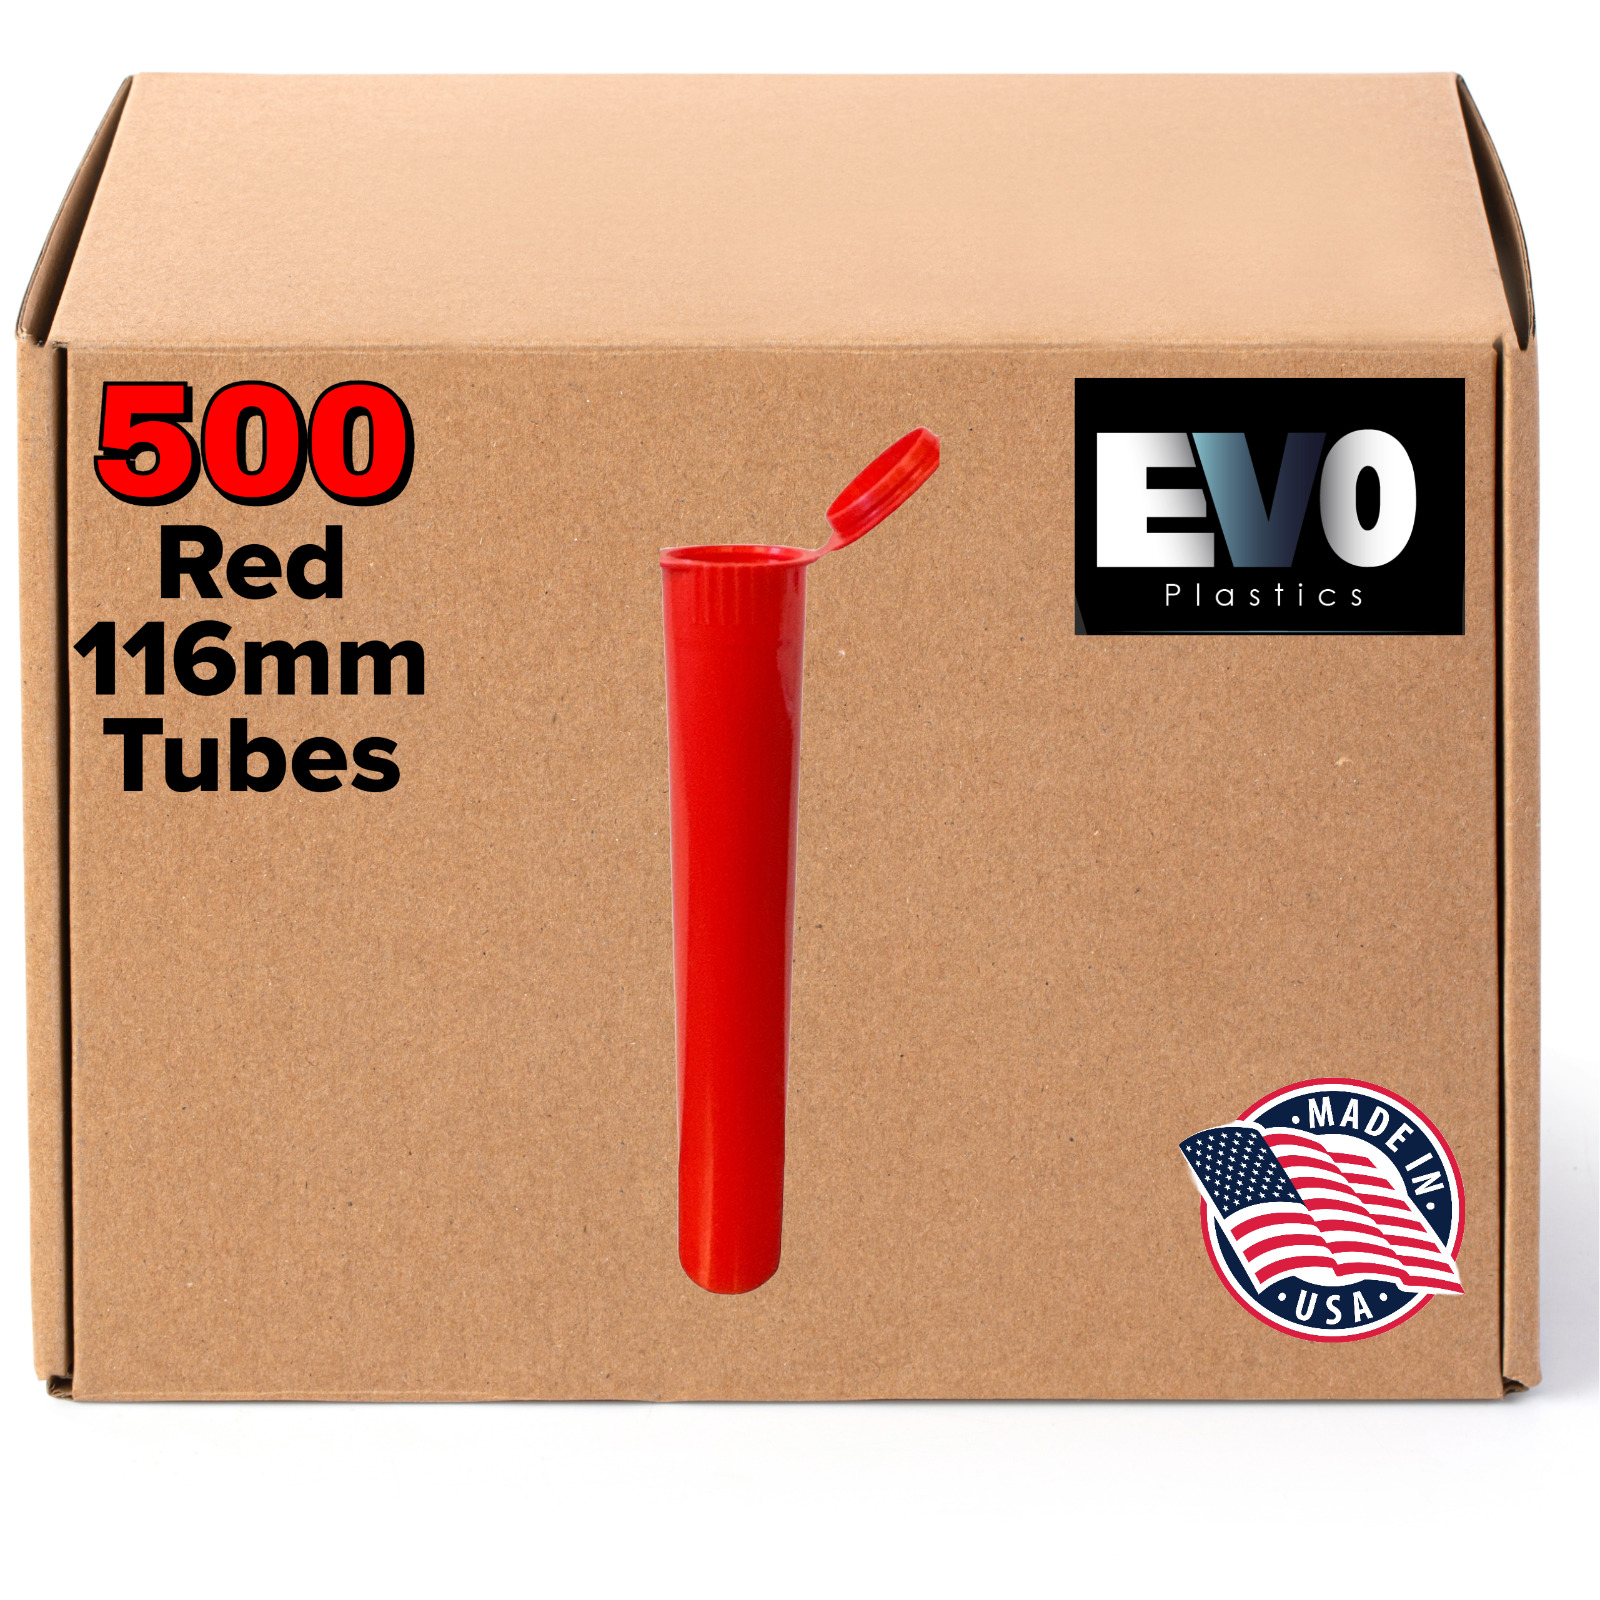 116mm Tubes - Red - 500 count , Pop Top Joints, BPA-Free Pre-Roll - USA Made